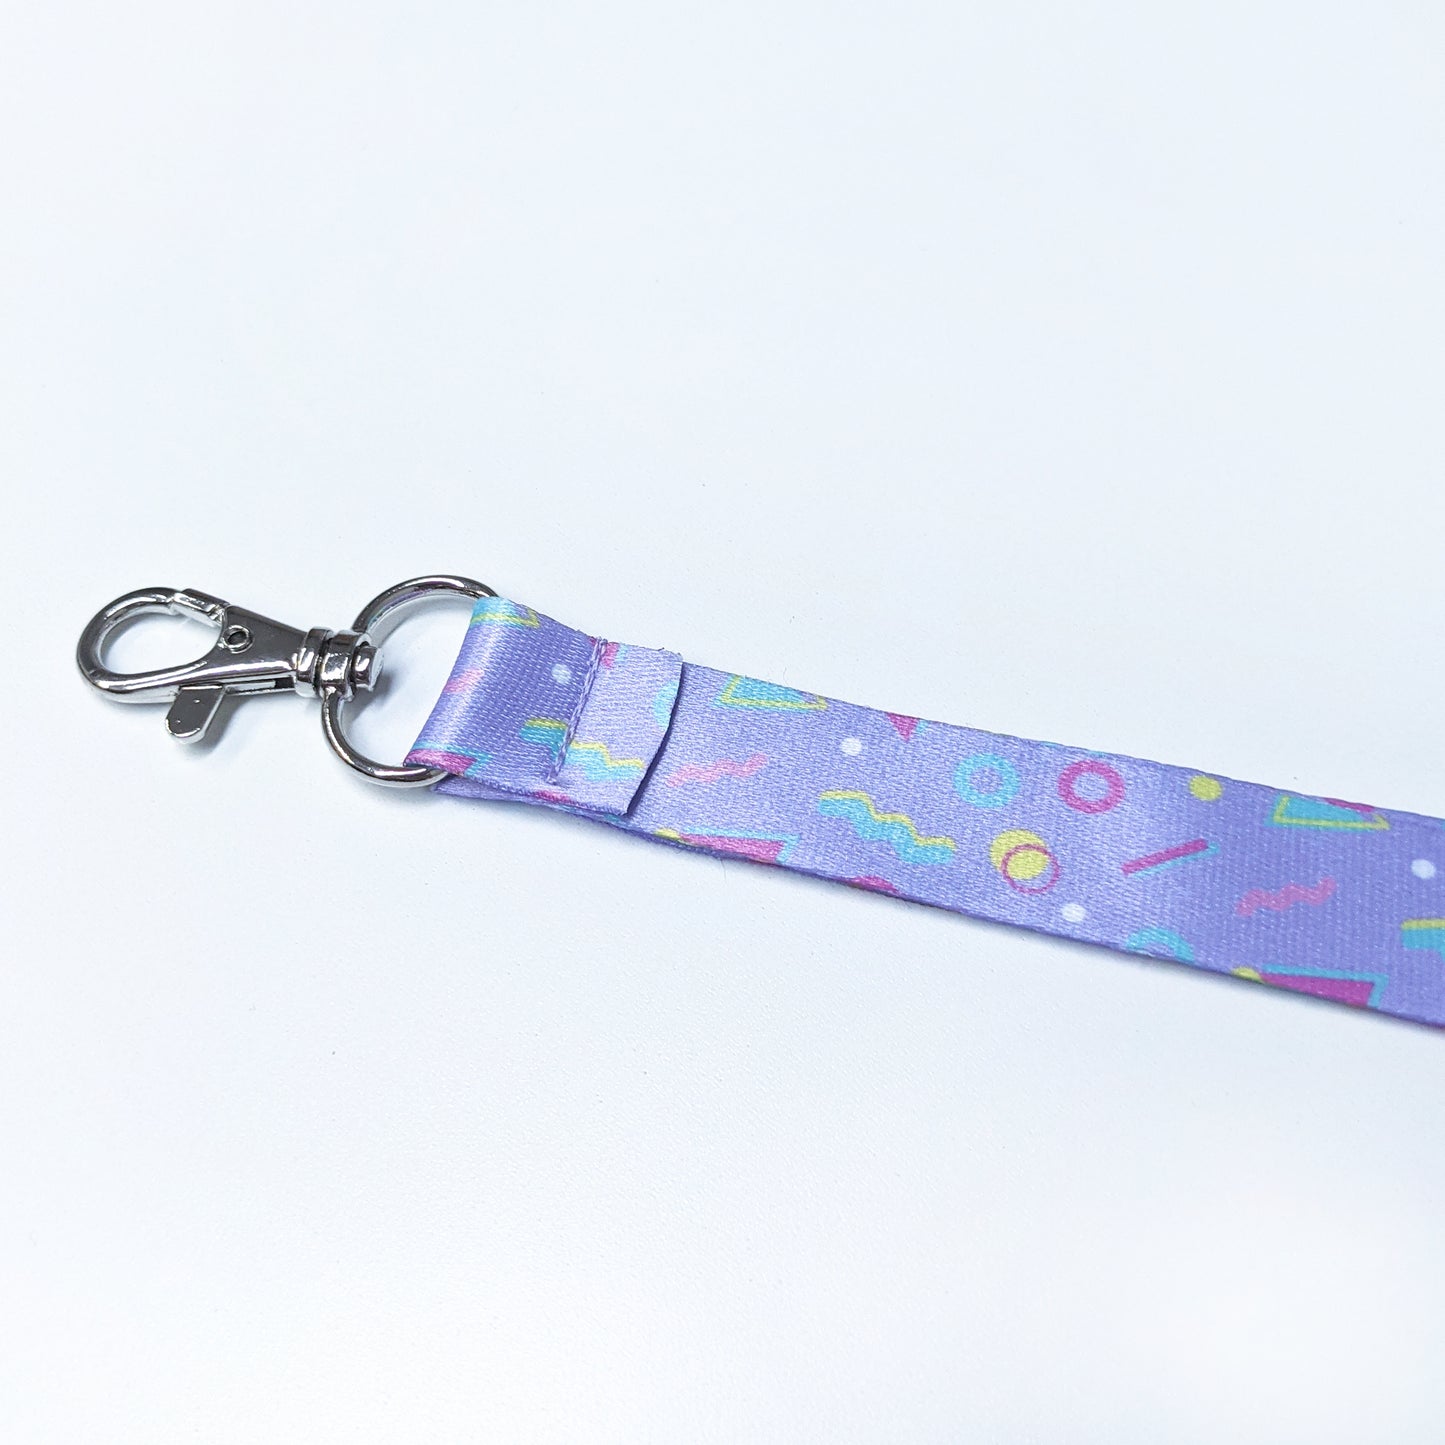 Retro Arcade 90's Carpet Lanyard with Silver Lobster Clasp | Cute Lanyard | Cute Key Holder | by Tawny Illustrations